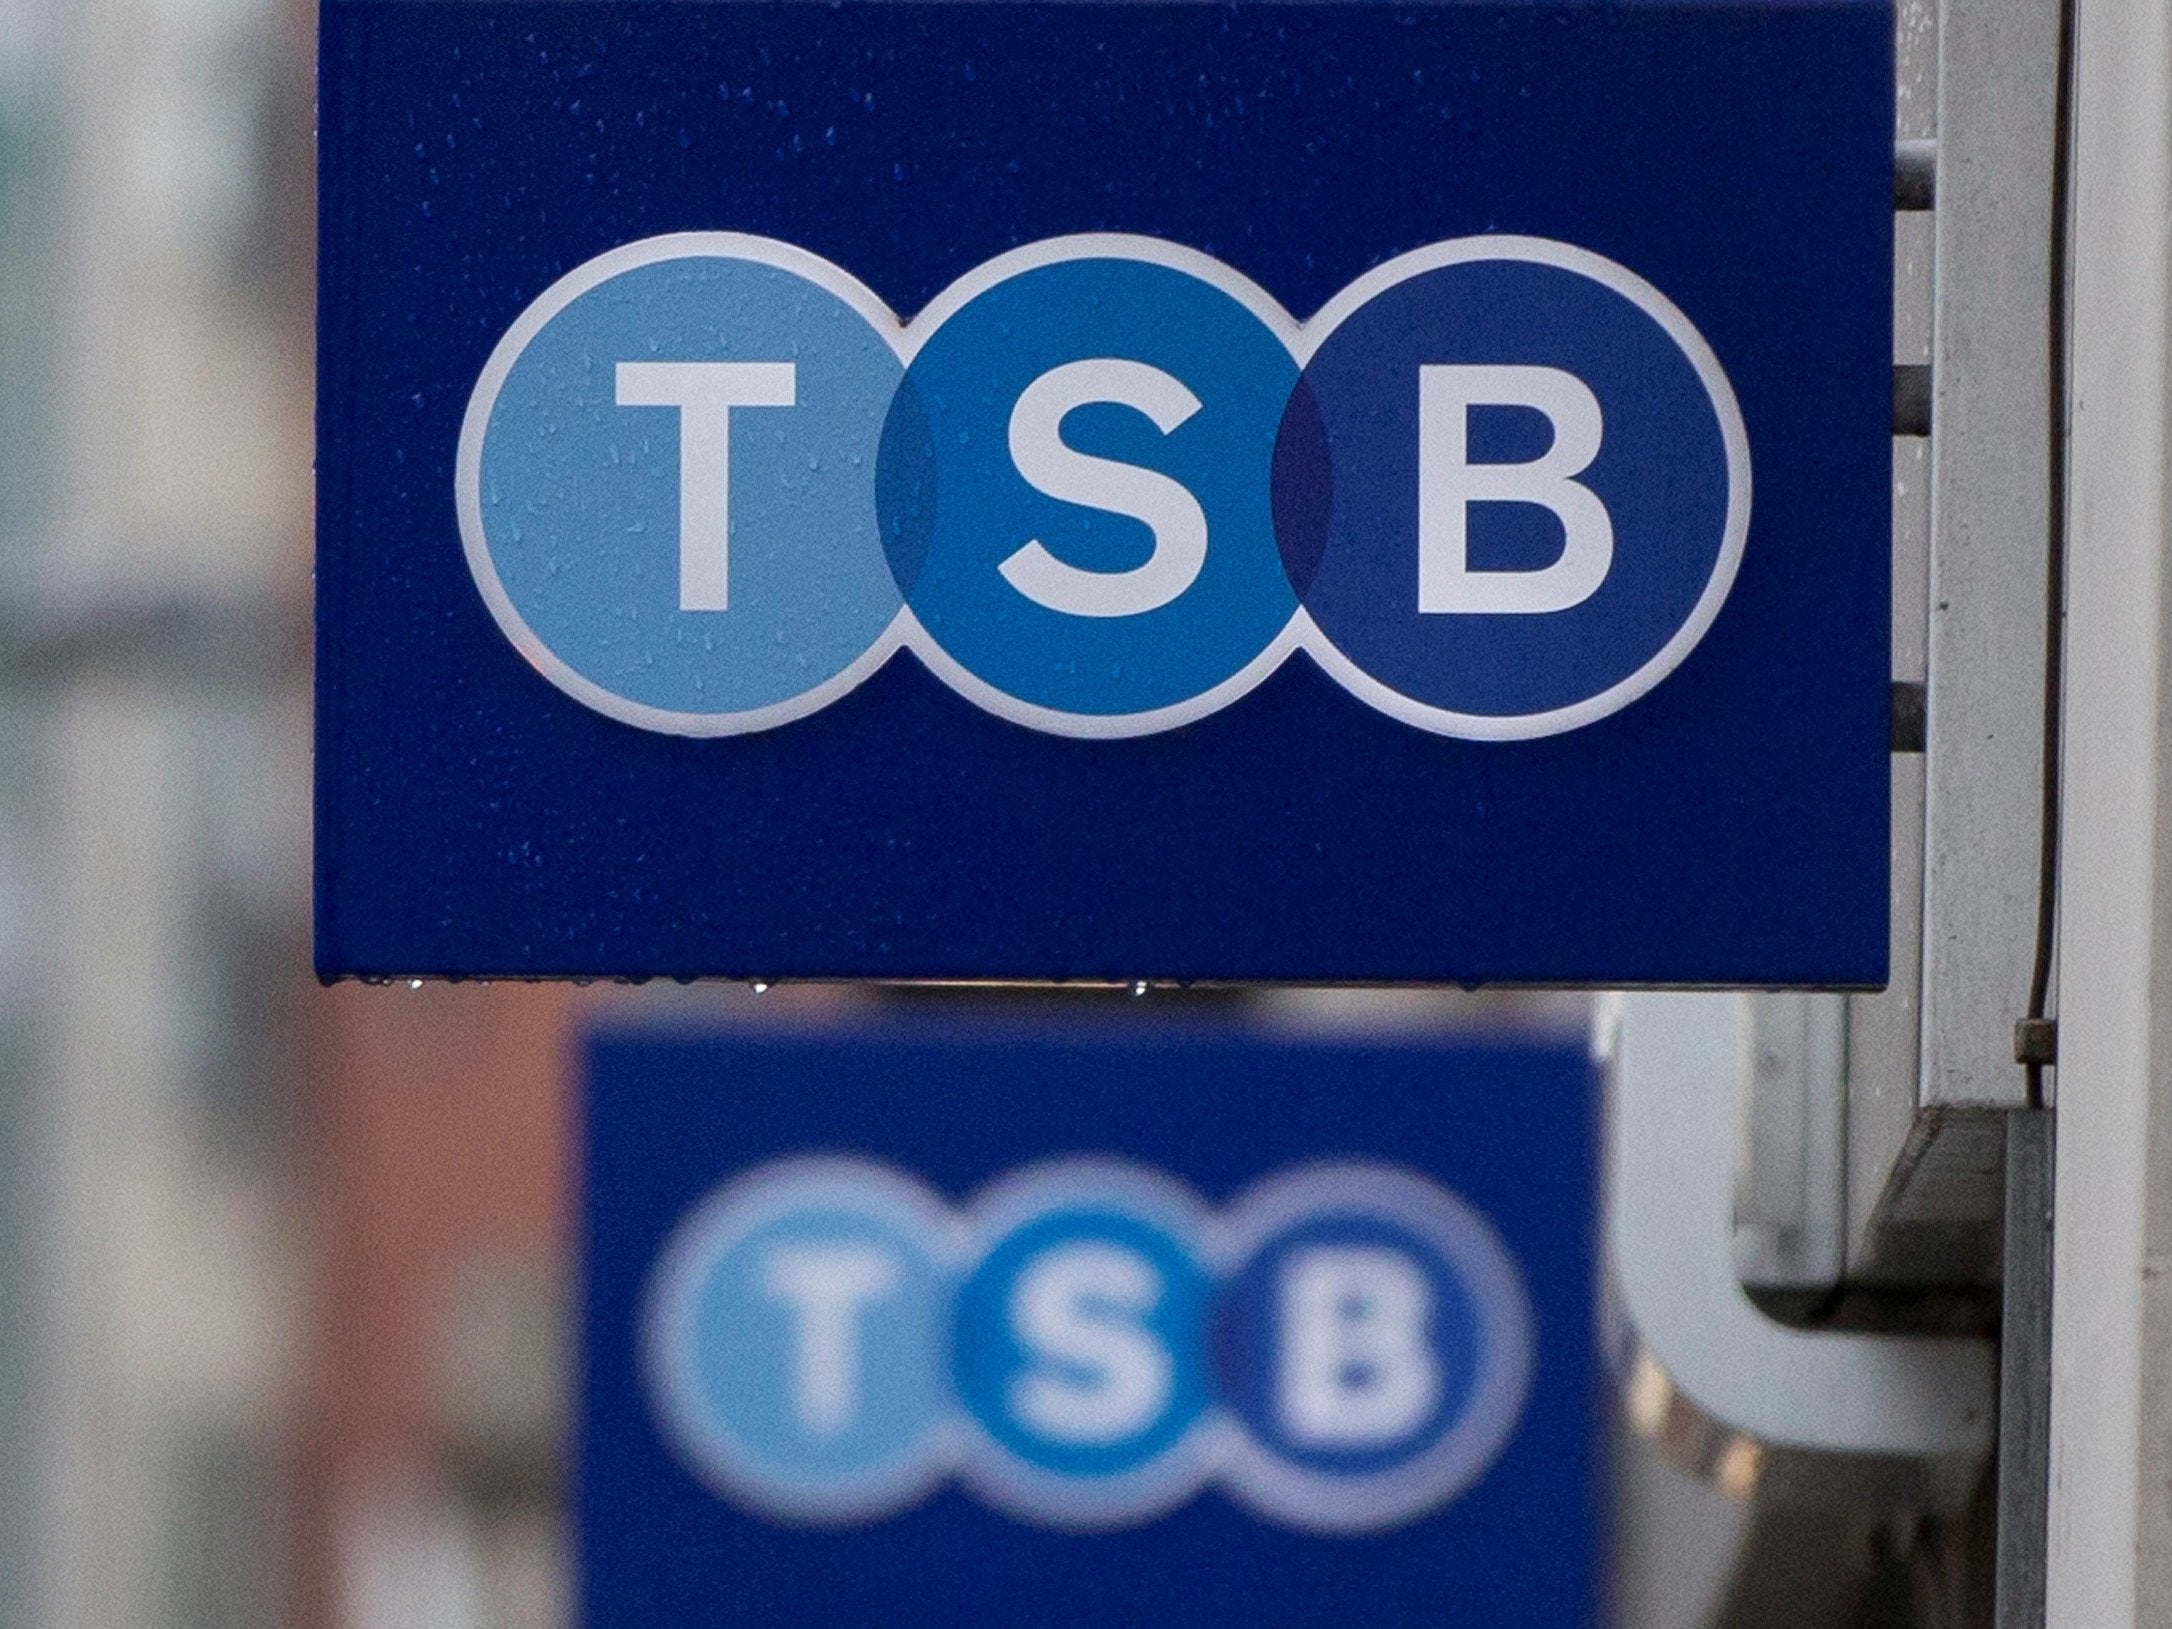 Friends who have been referred and switch their bank account to TSB will receive £75